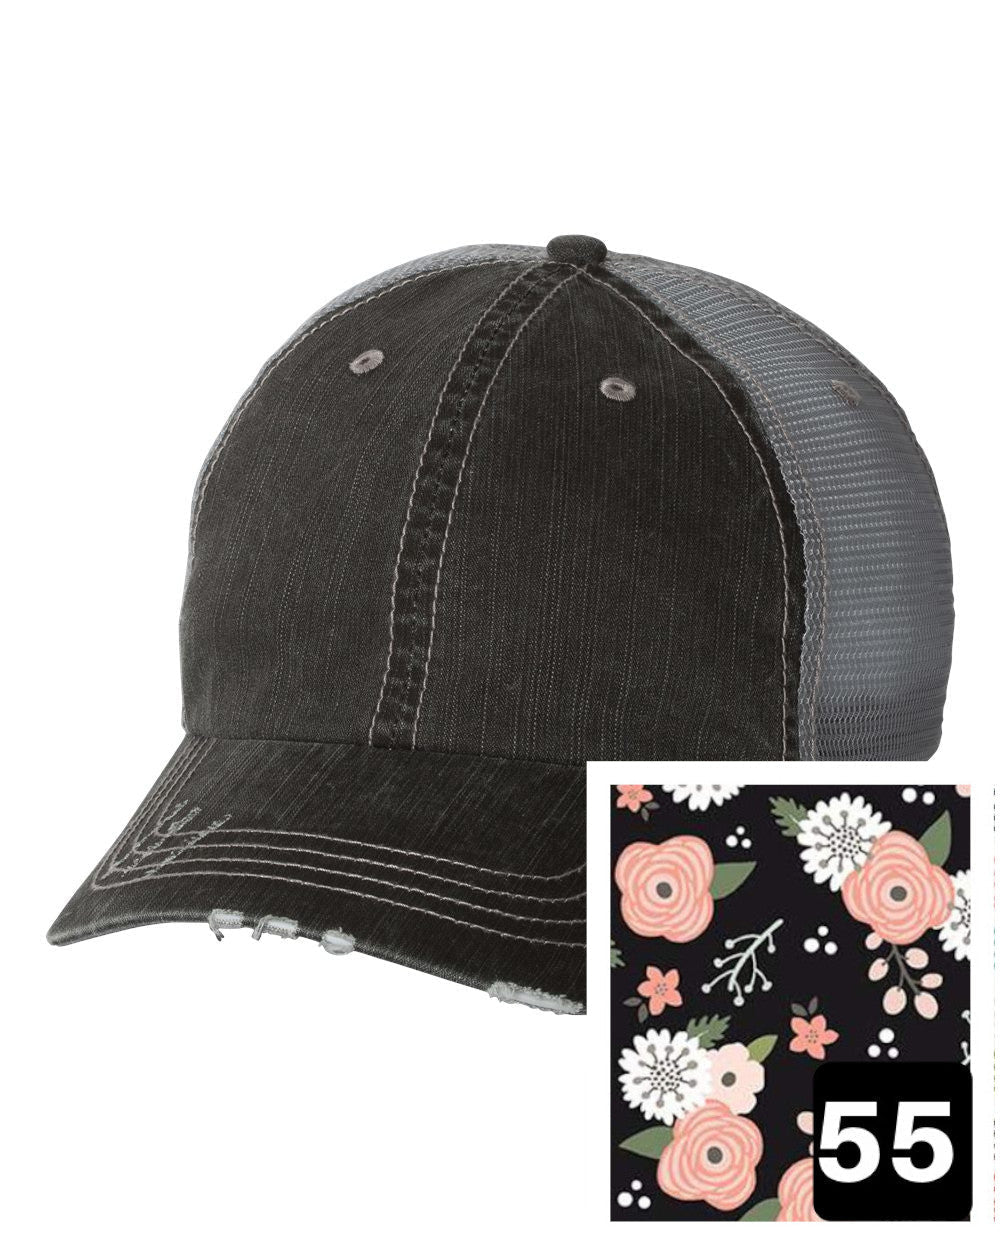 gray distressed trucker hat with petite floral on navy fabric state of Wyoming